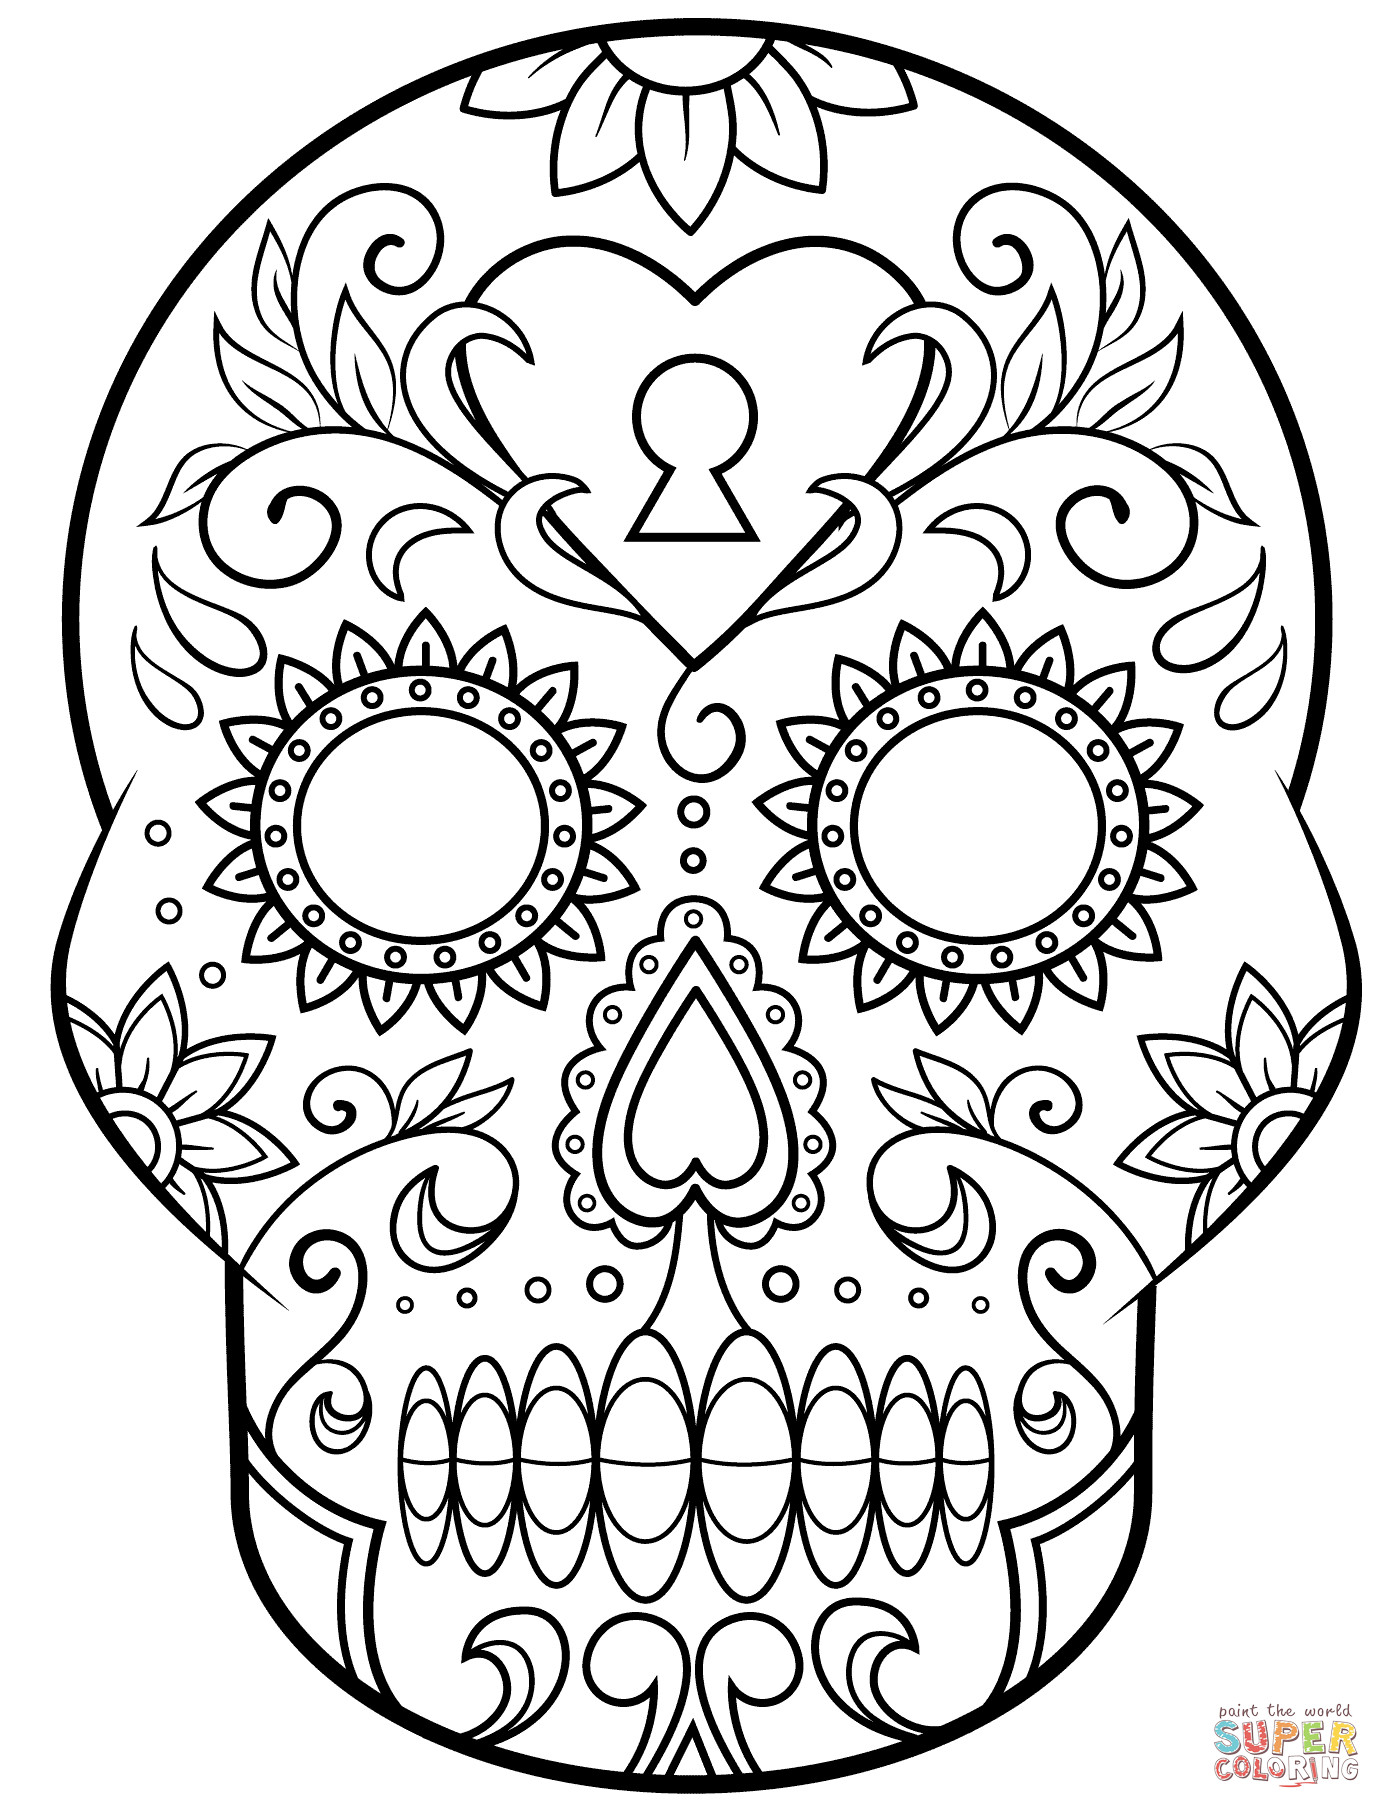 Printable Sugar Skull Coloring Pages
 Day of the Dead Sugar Skull coloring page